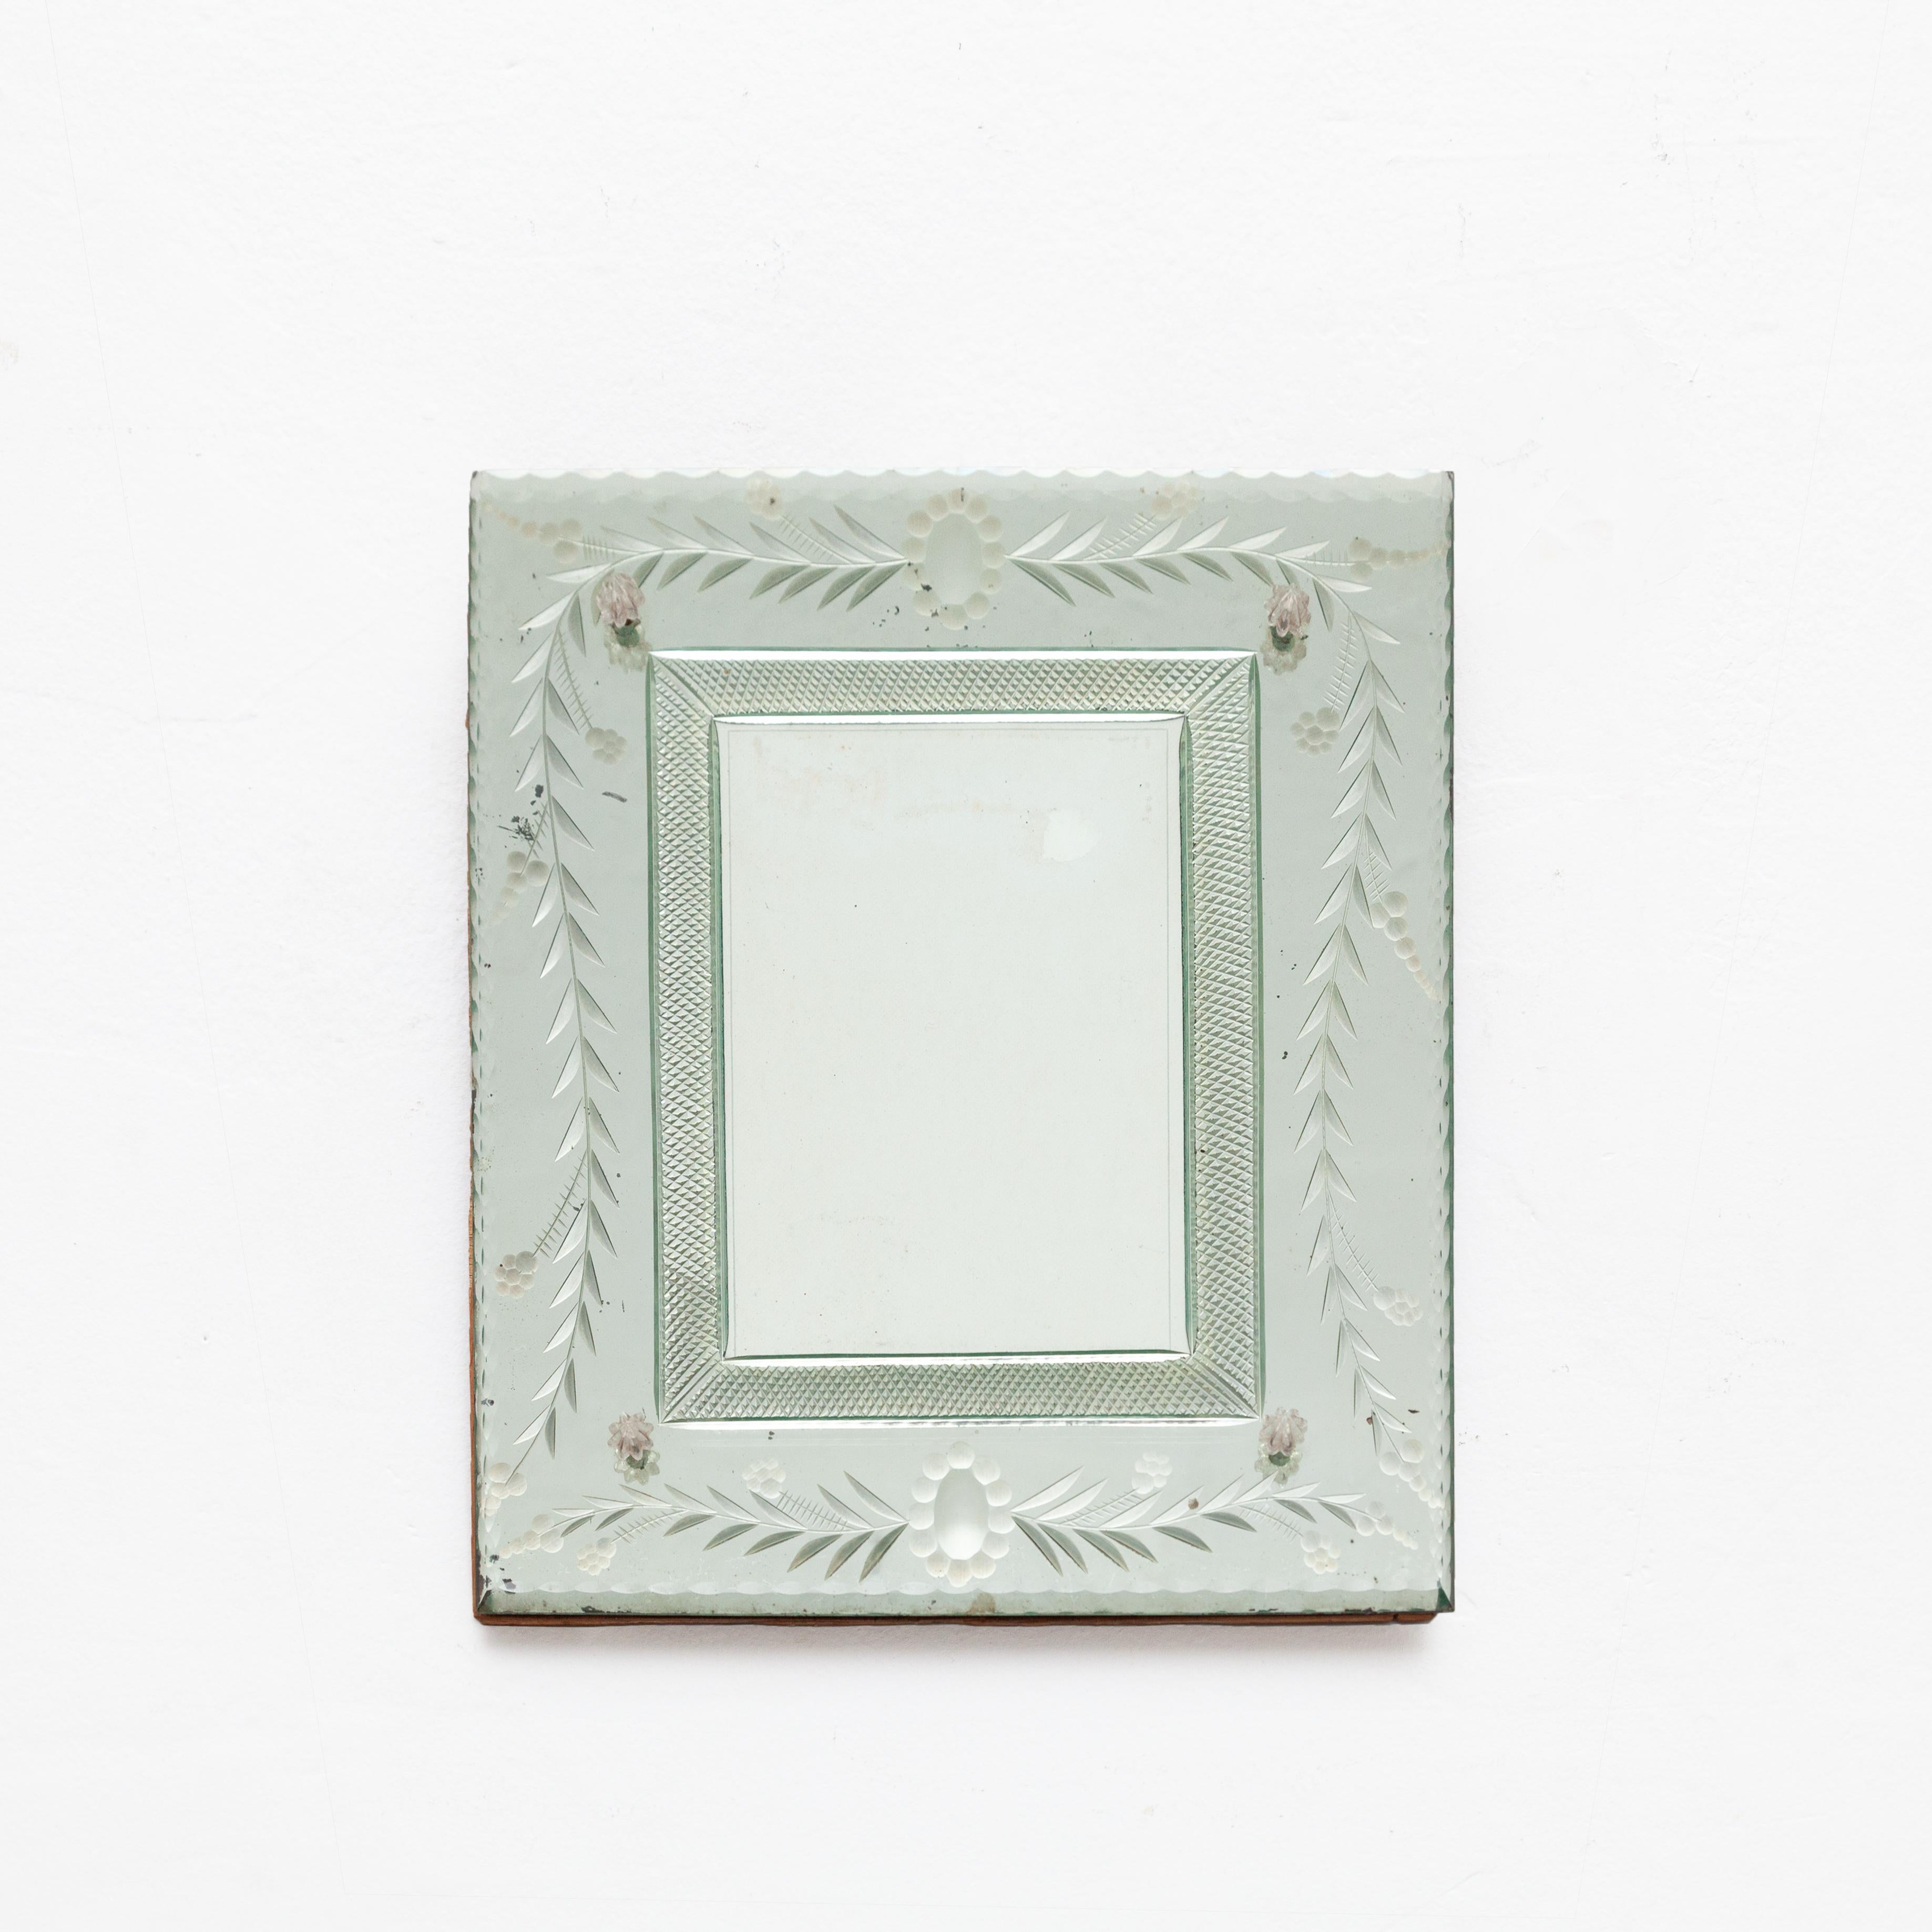 Mid-century glass picture frame.
Traditionally manufactured circa 1950.

In original condition with minor wear consistently of age and use, preserving a beautiful patina.

Material:
Glass.

 